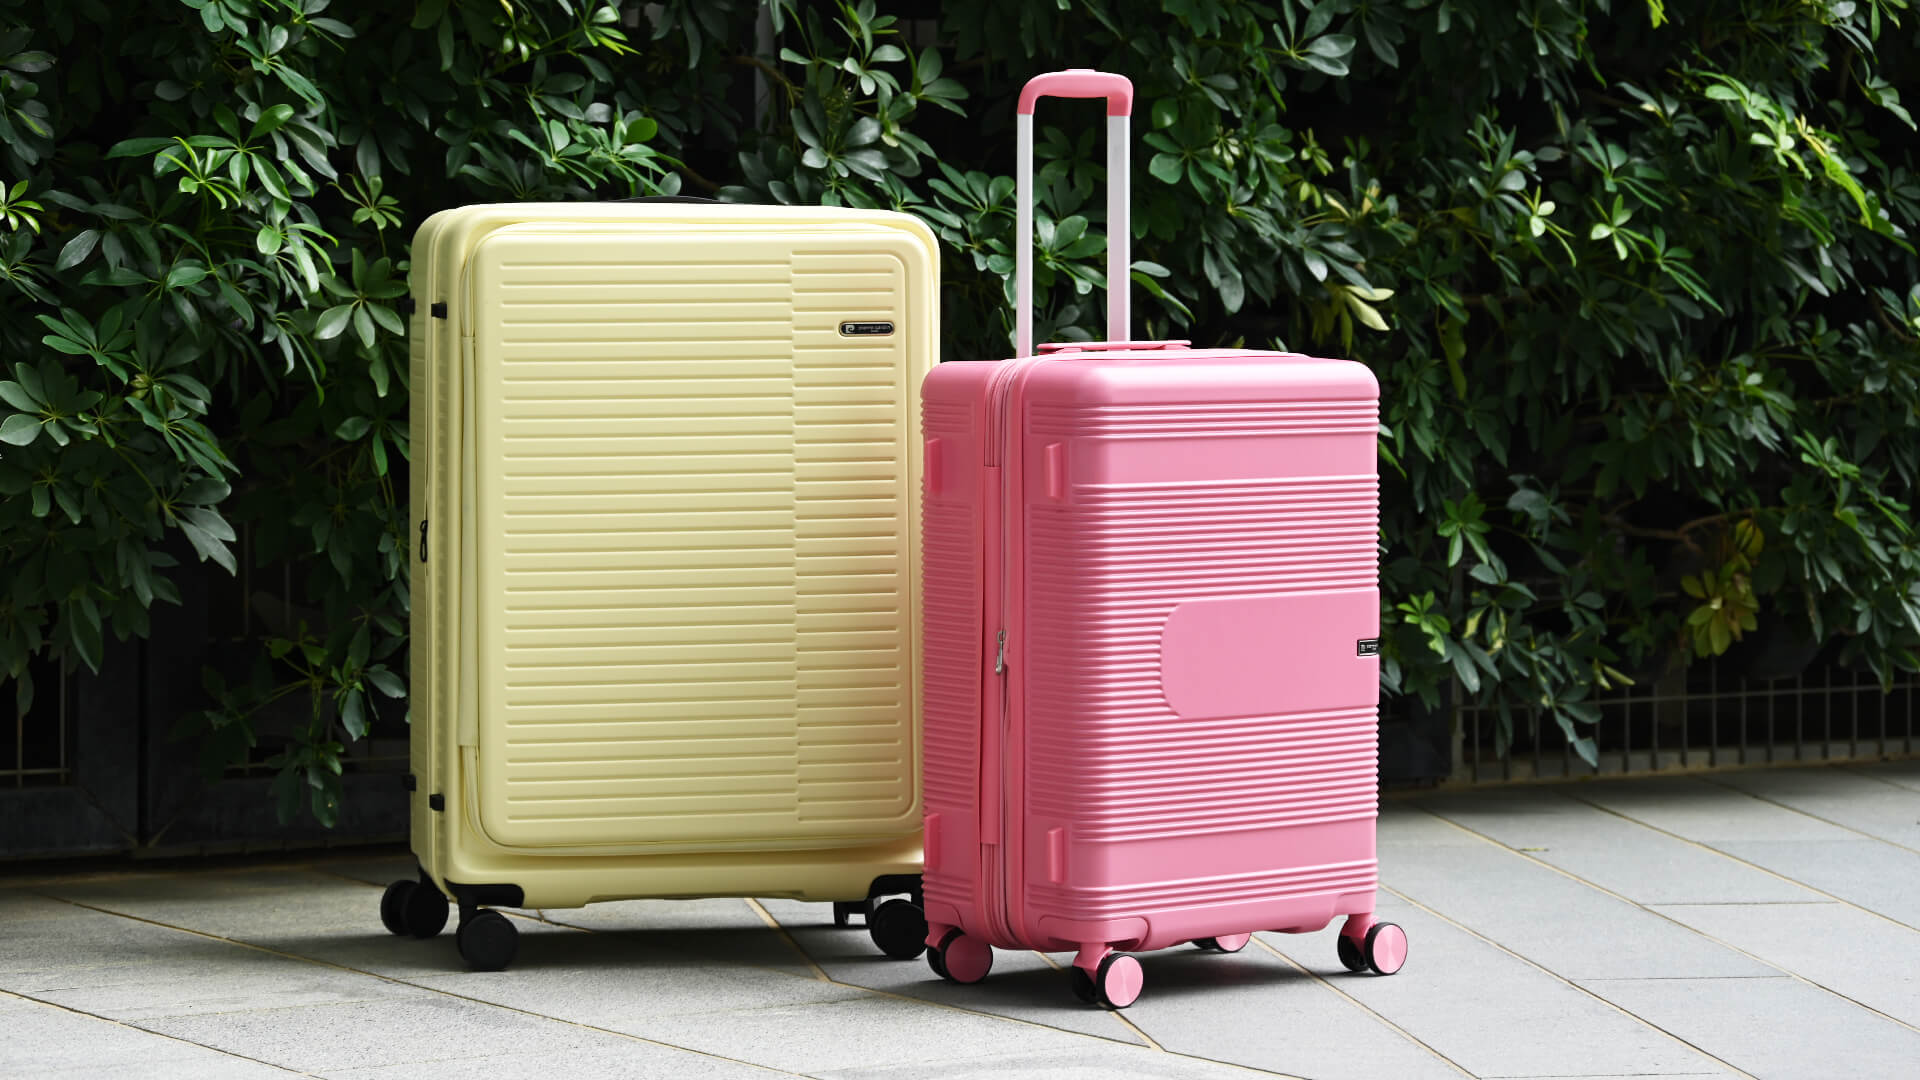 Suntec Atrium Sale Has Up To 70% Off Branded Luggage, Gear Up For June ...